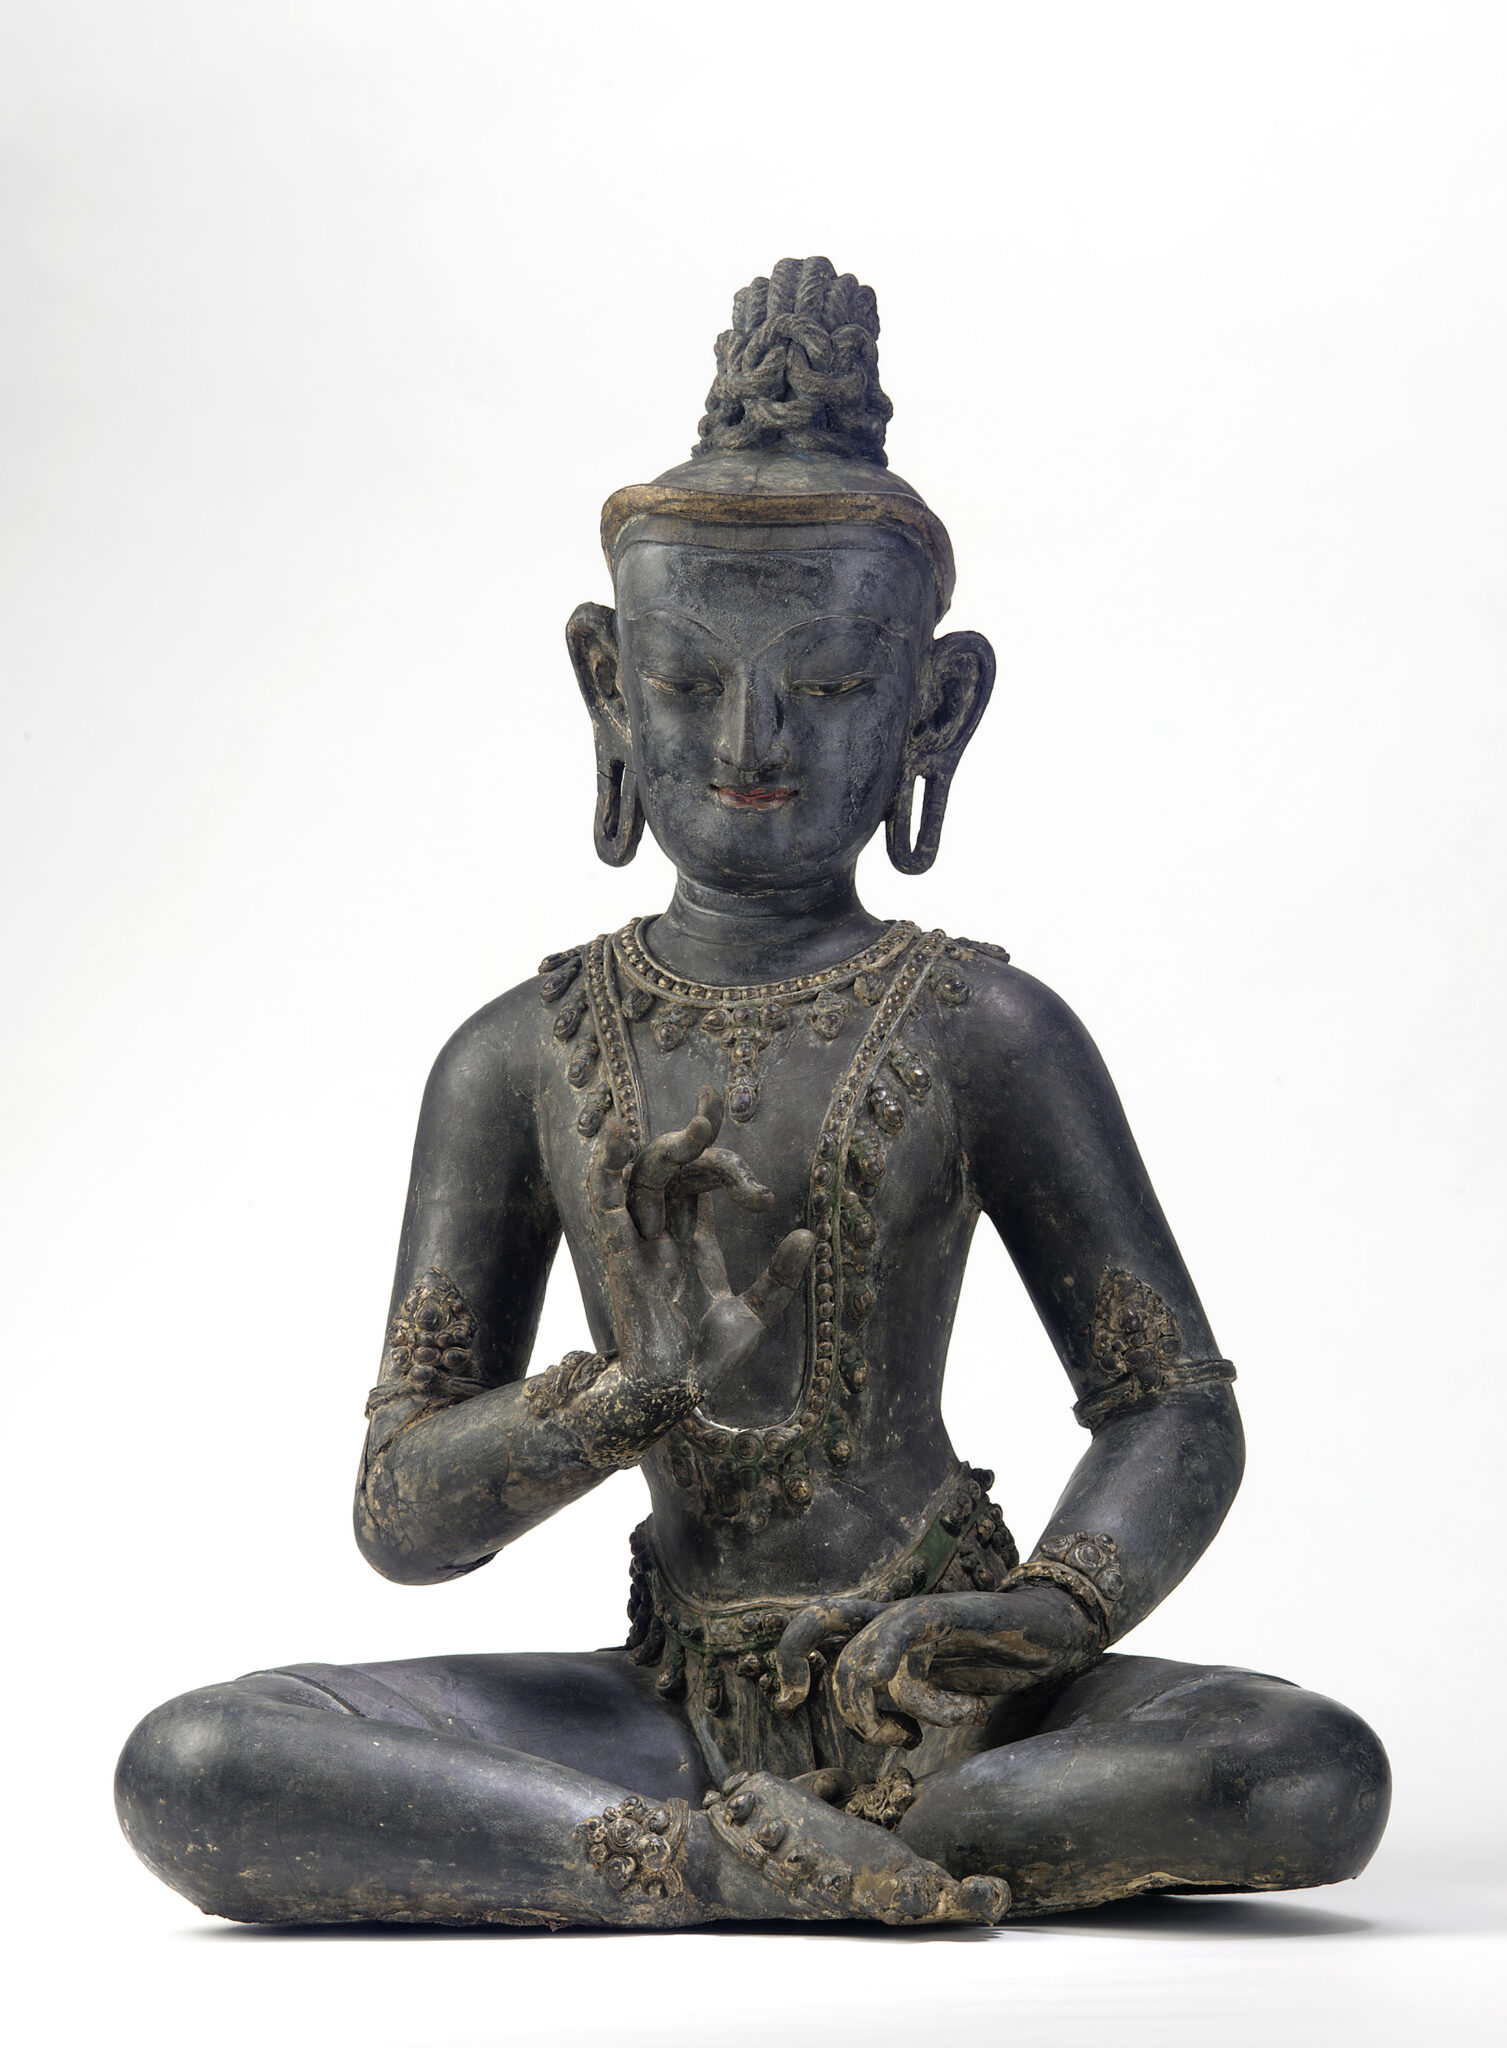 Dark brown seated Bodhisattva statue, chest inclined towards left with hands posed in mudras